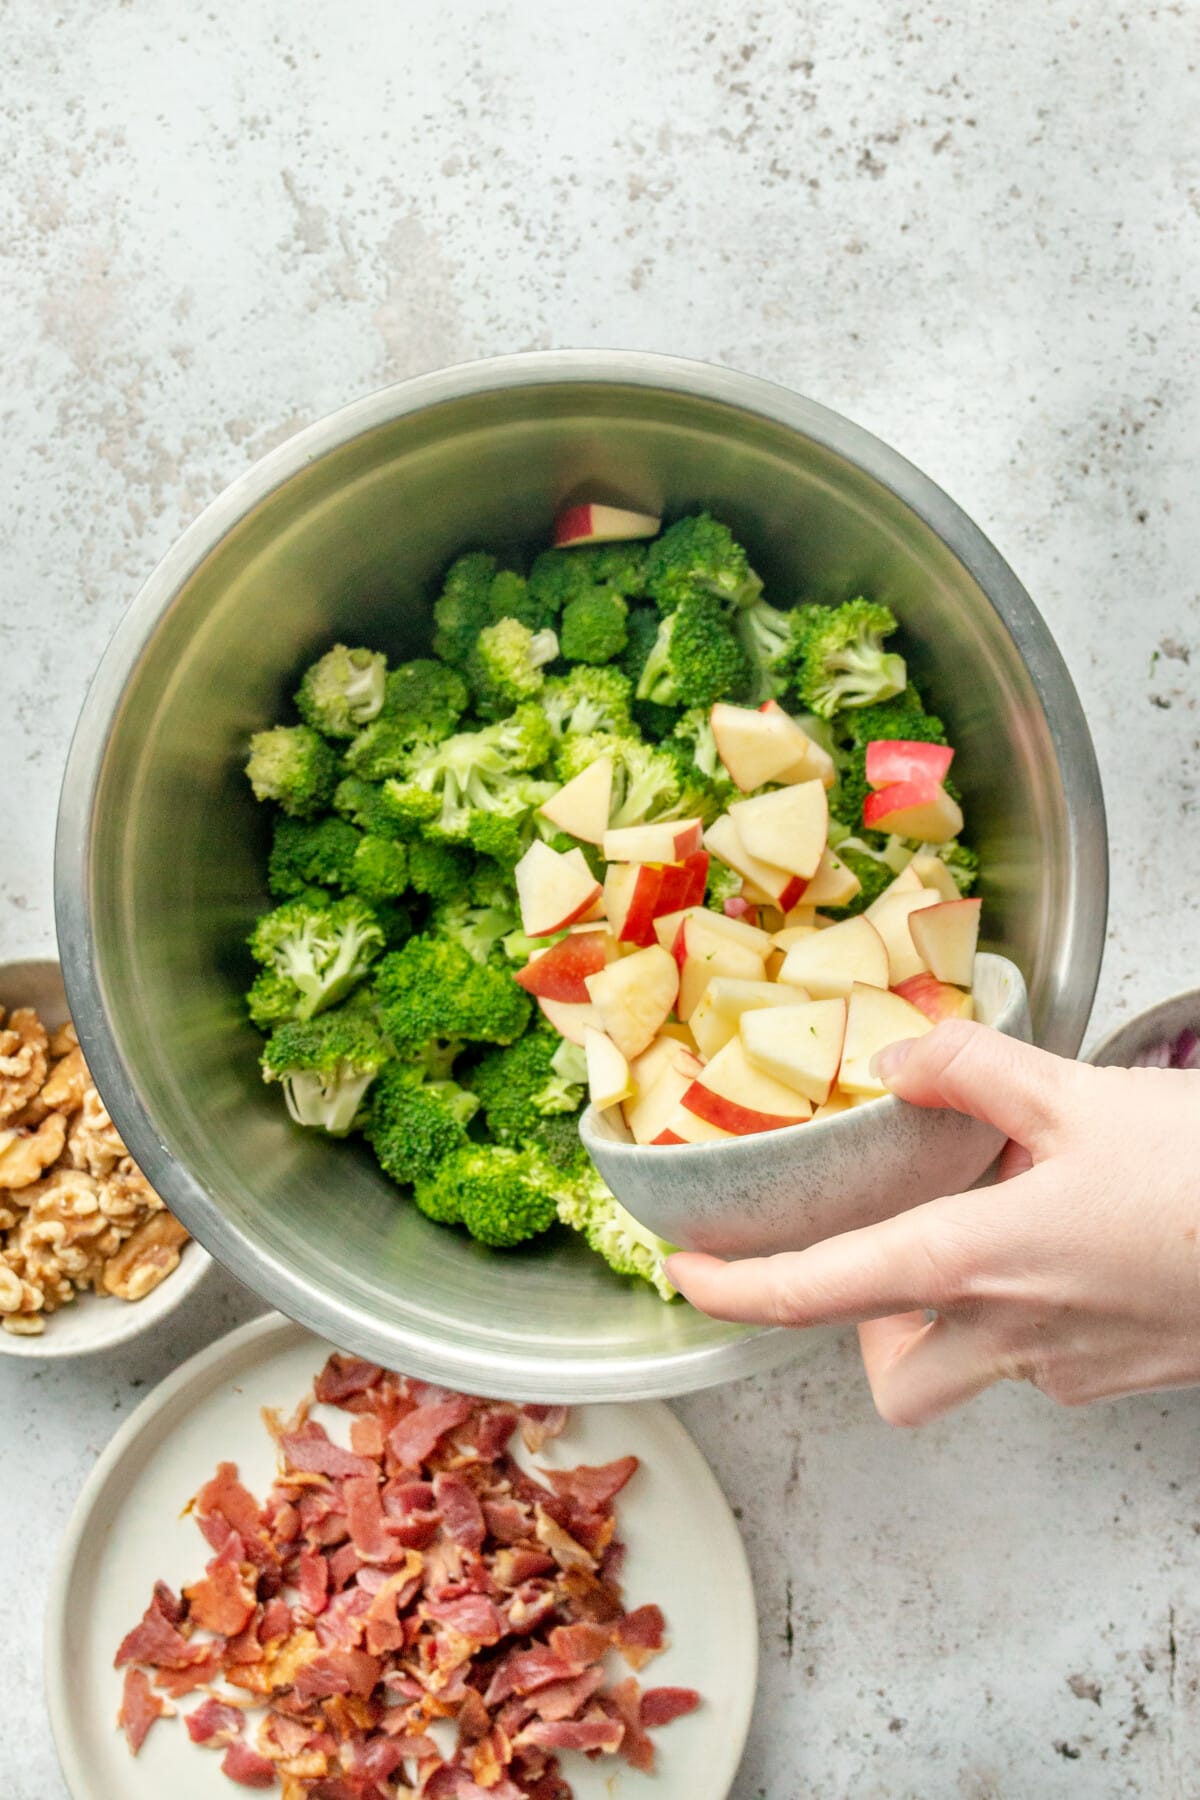 Apple chunks are tossed into a bowl with broccoli pieces for a salad in a stainless steel bowl on a light grey surface.